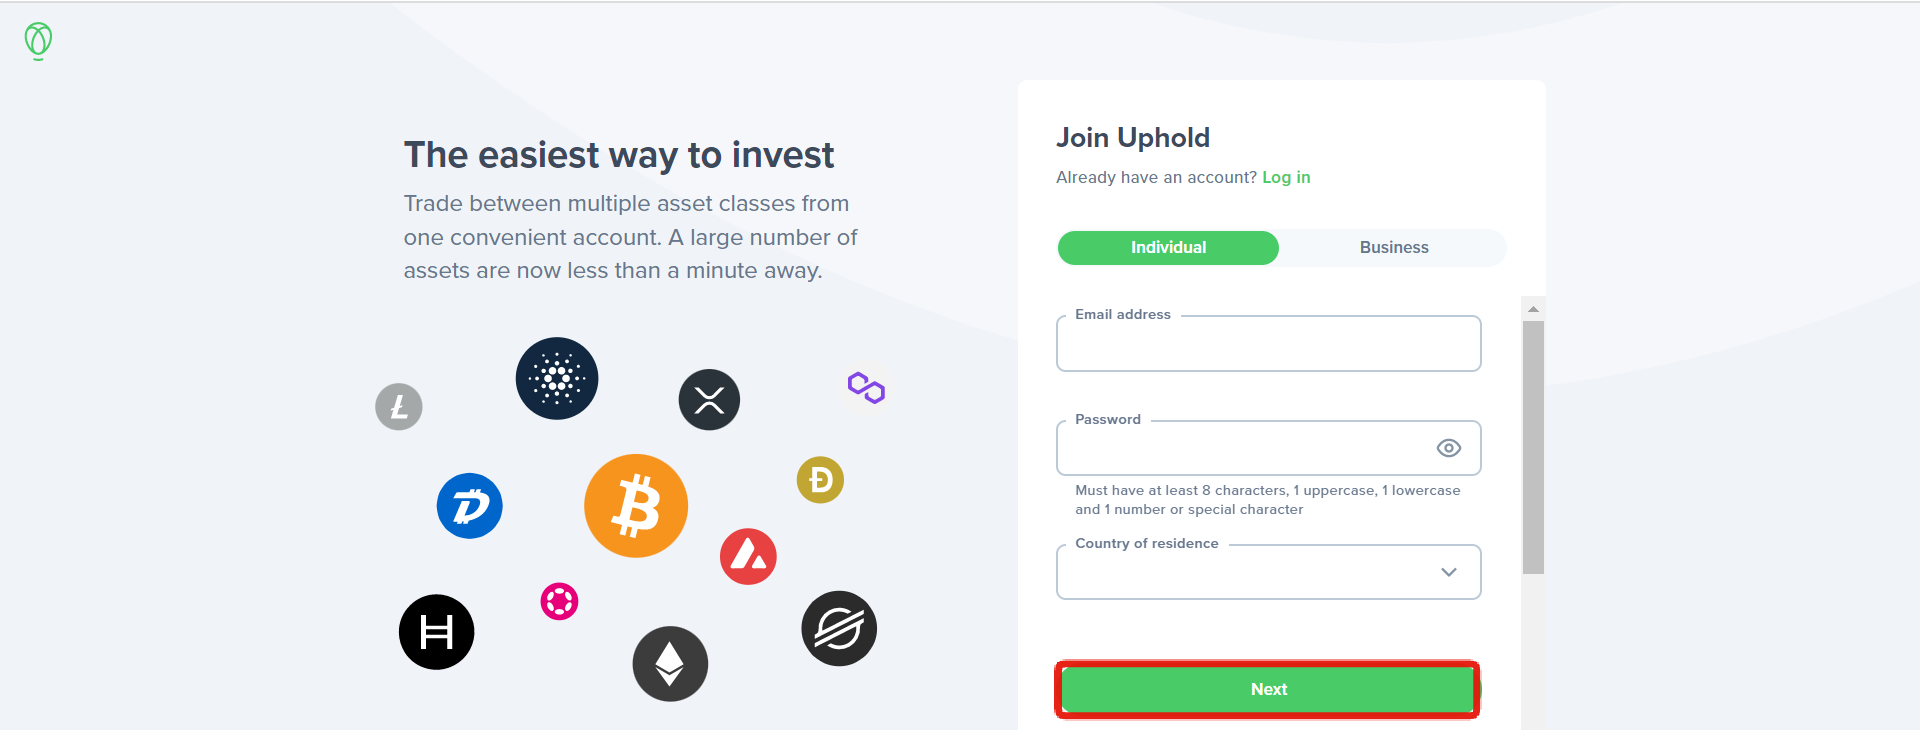 Uphold sign up page 